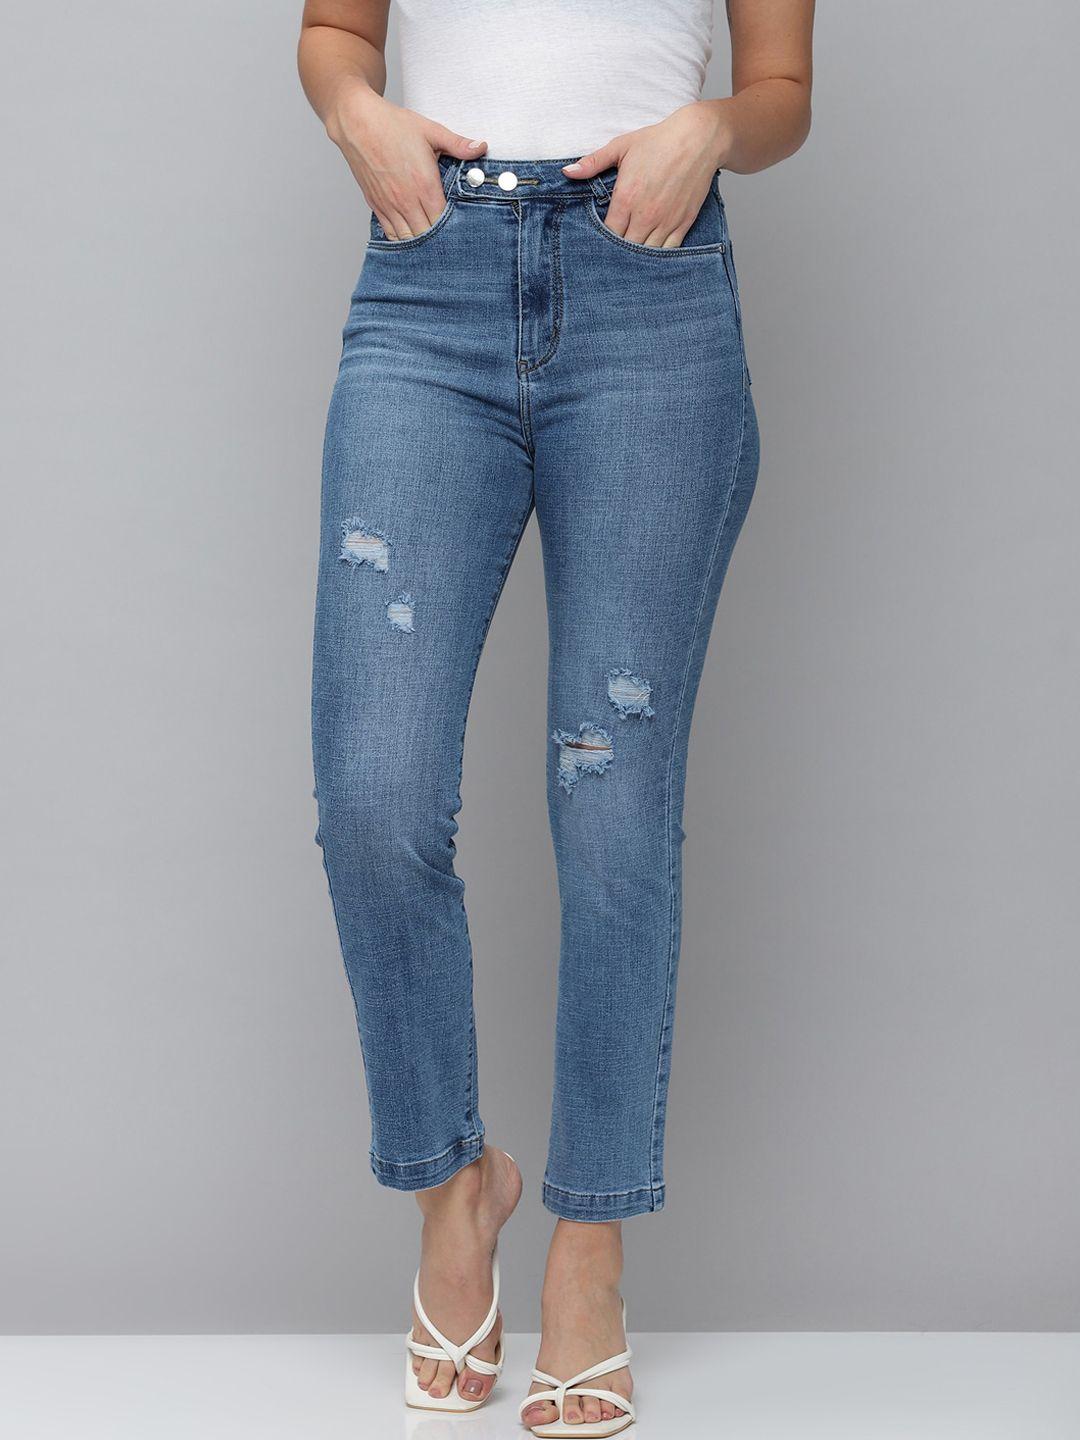 showoff-women-blue-jean-straight-fit-high-rise-mildly-distressed-light-fade-stretchable-jeans